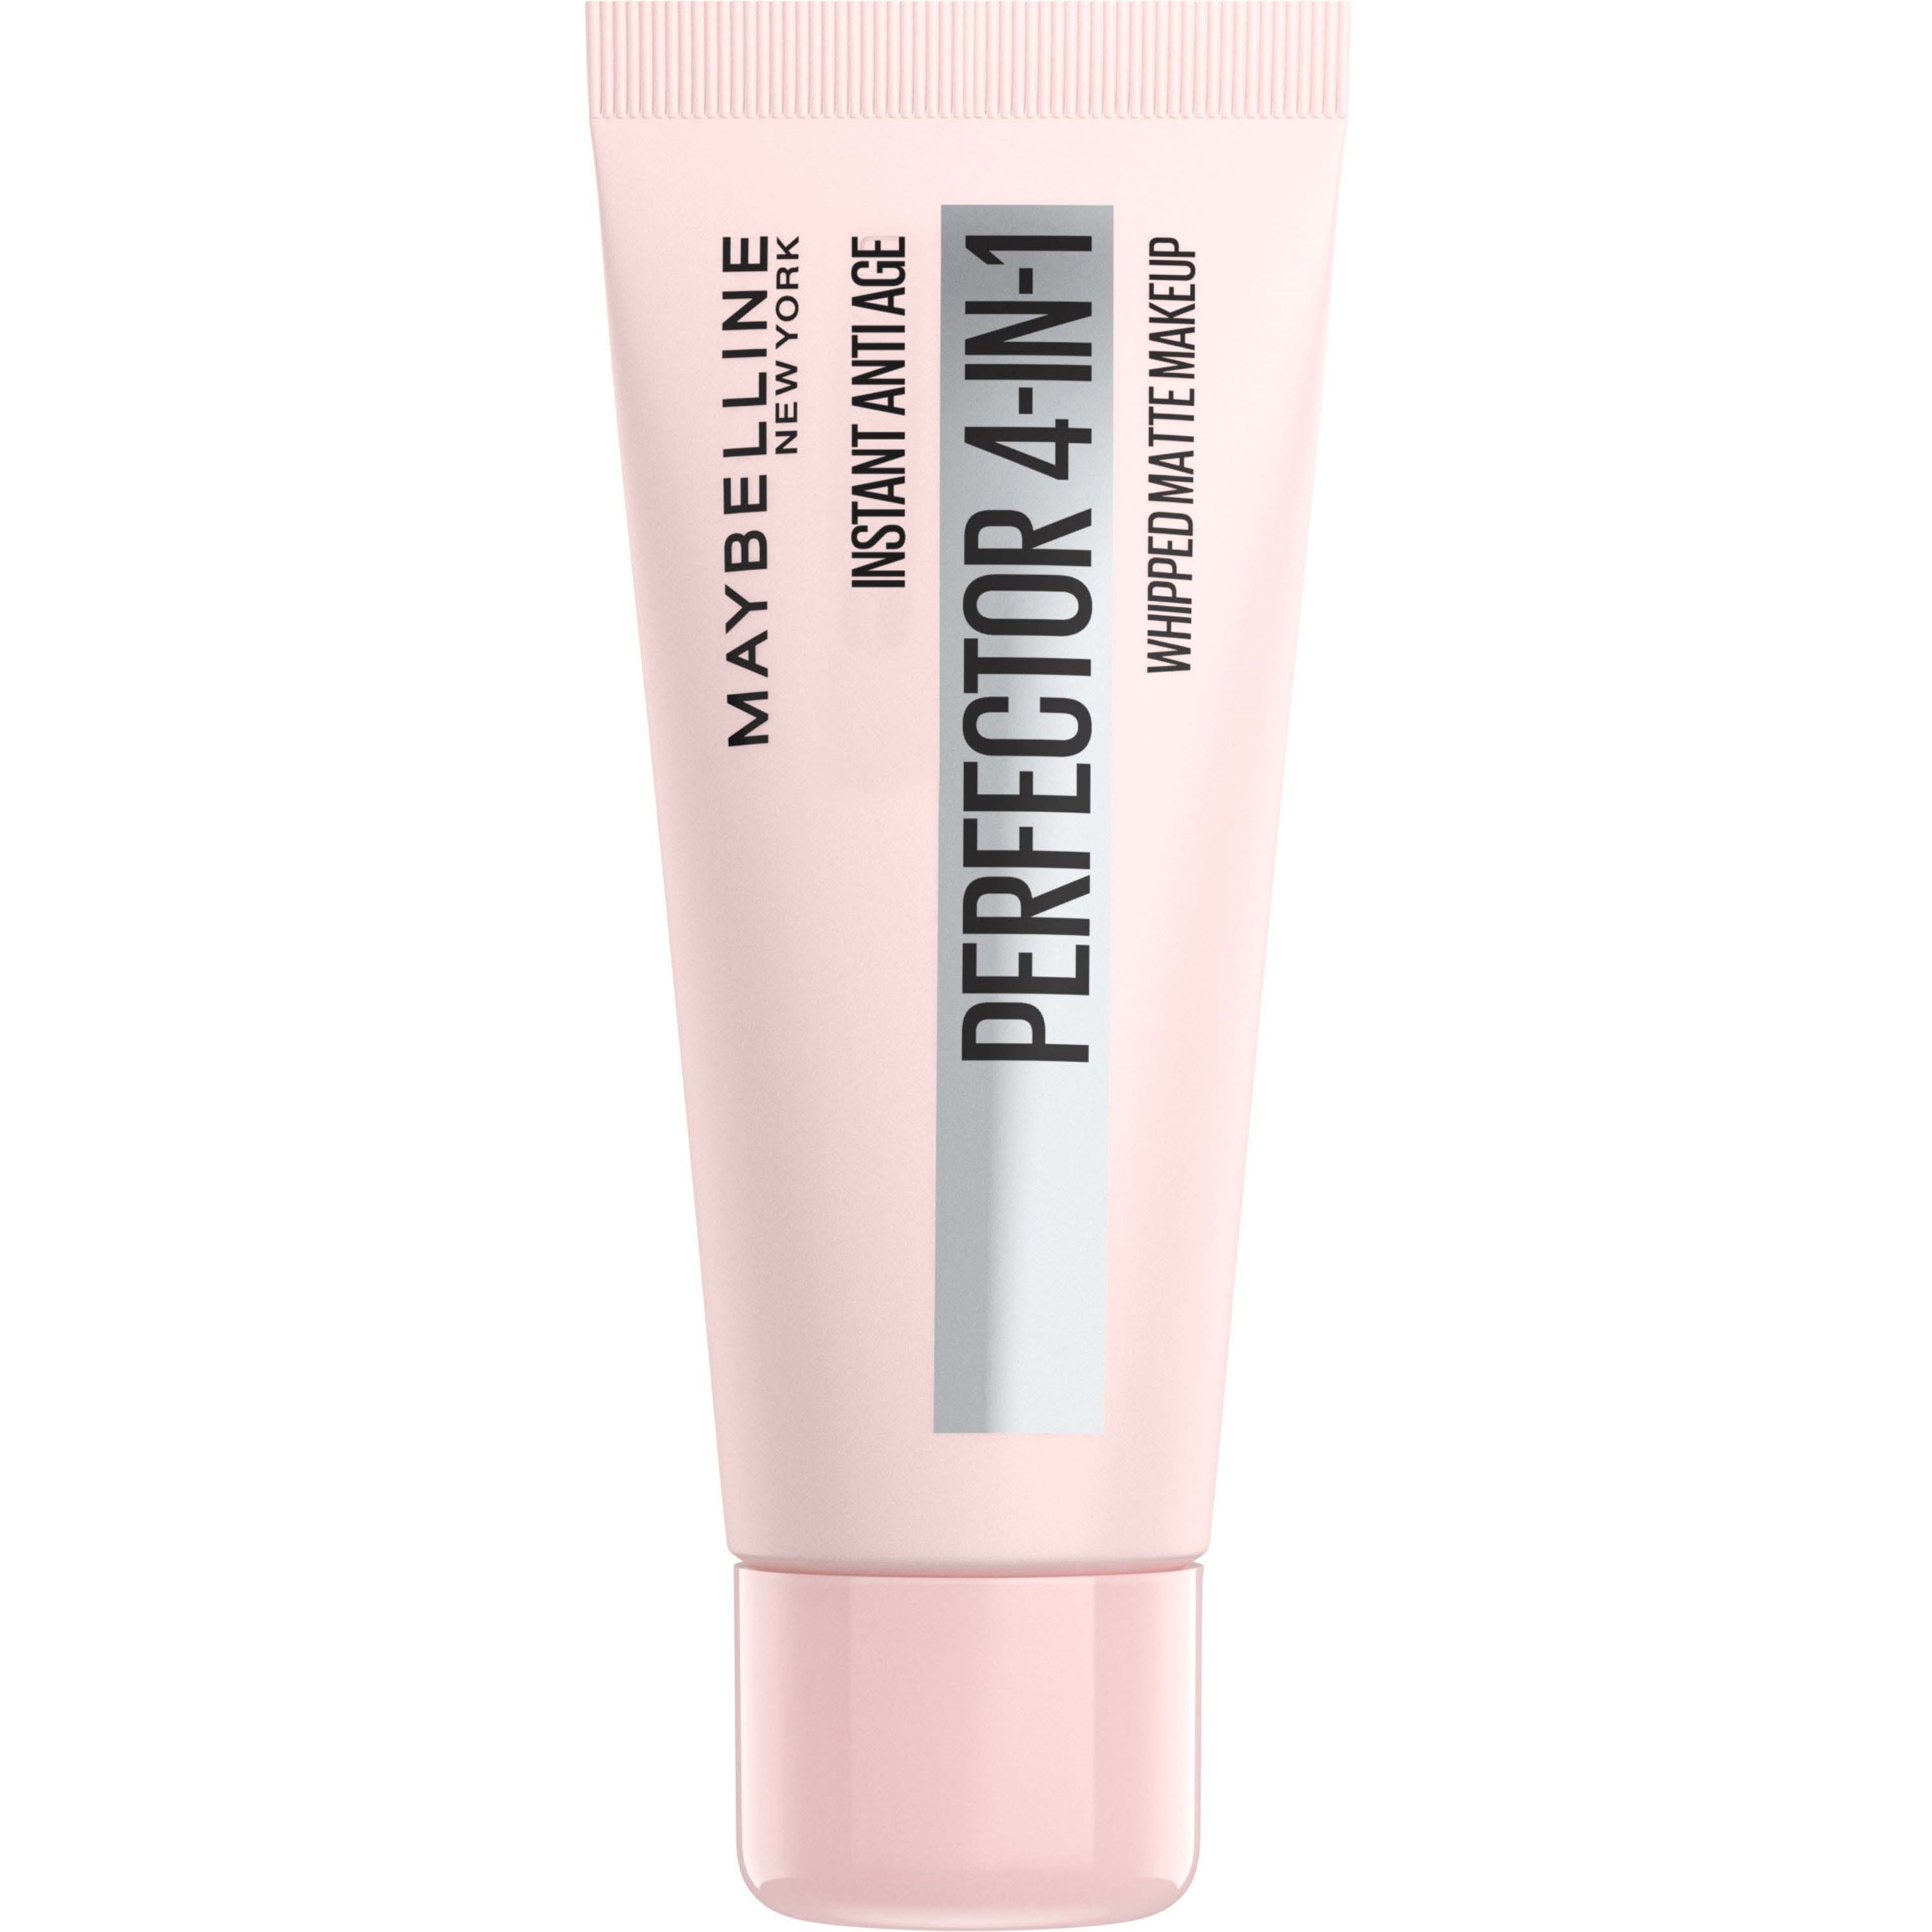 Maybelline New York Instant Perfector 4-in-1 Matte Makeup Fair Light